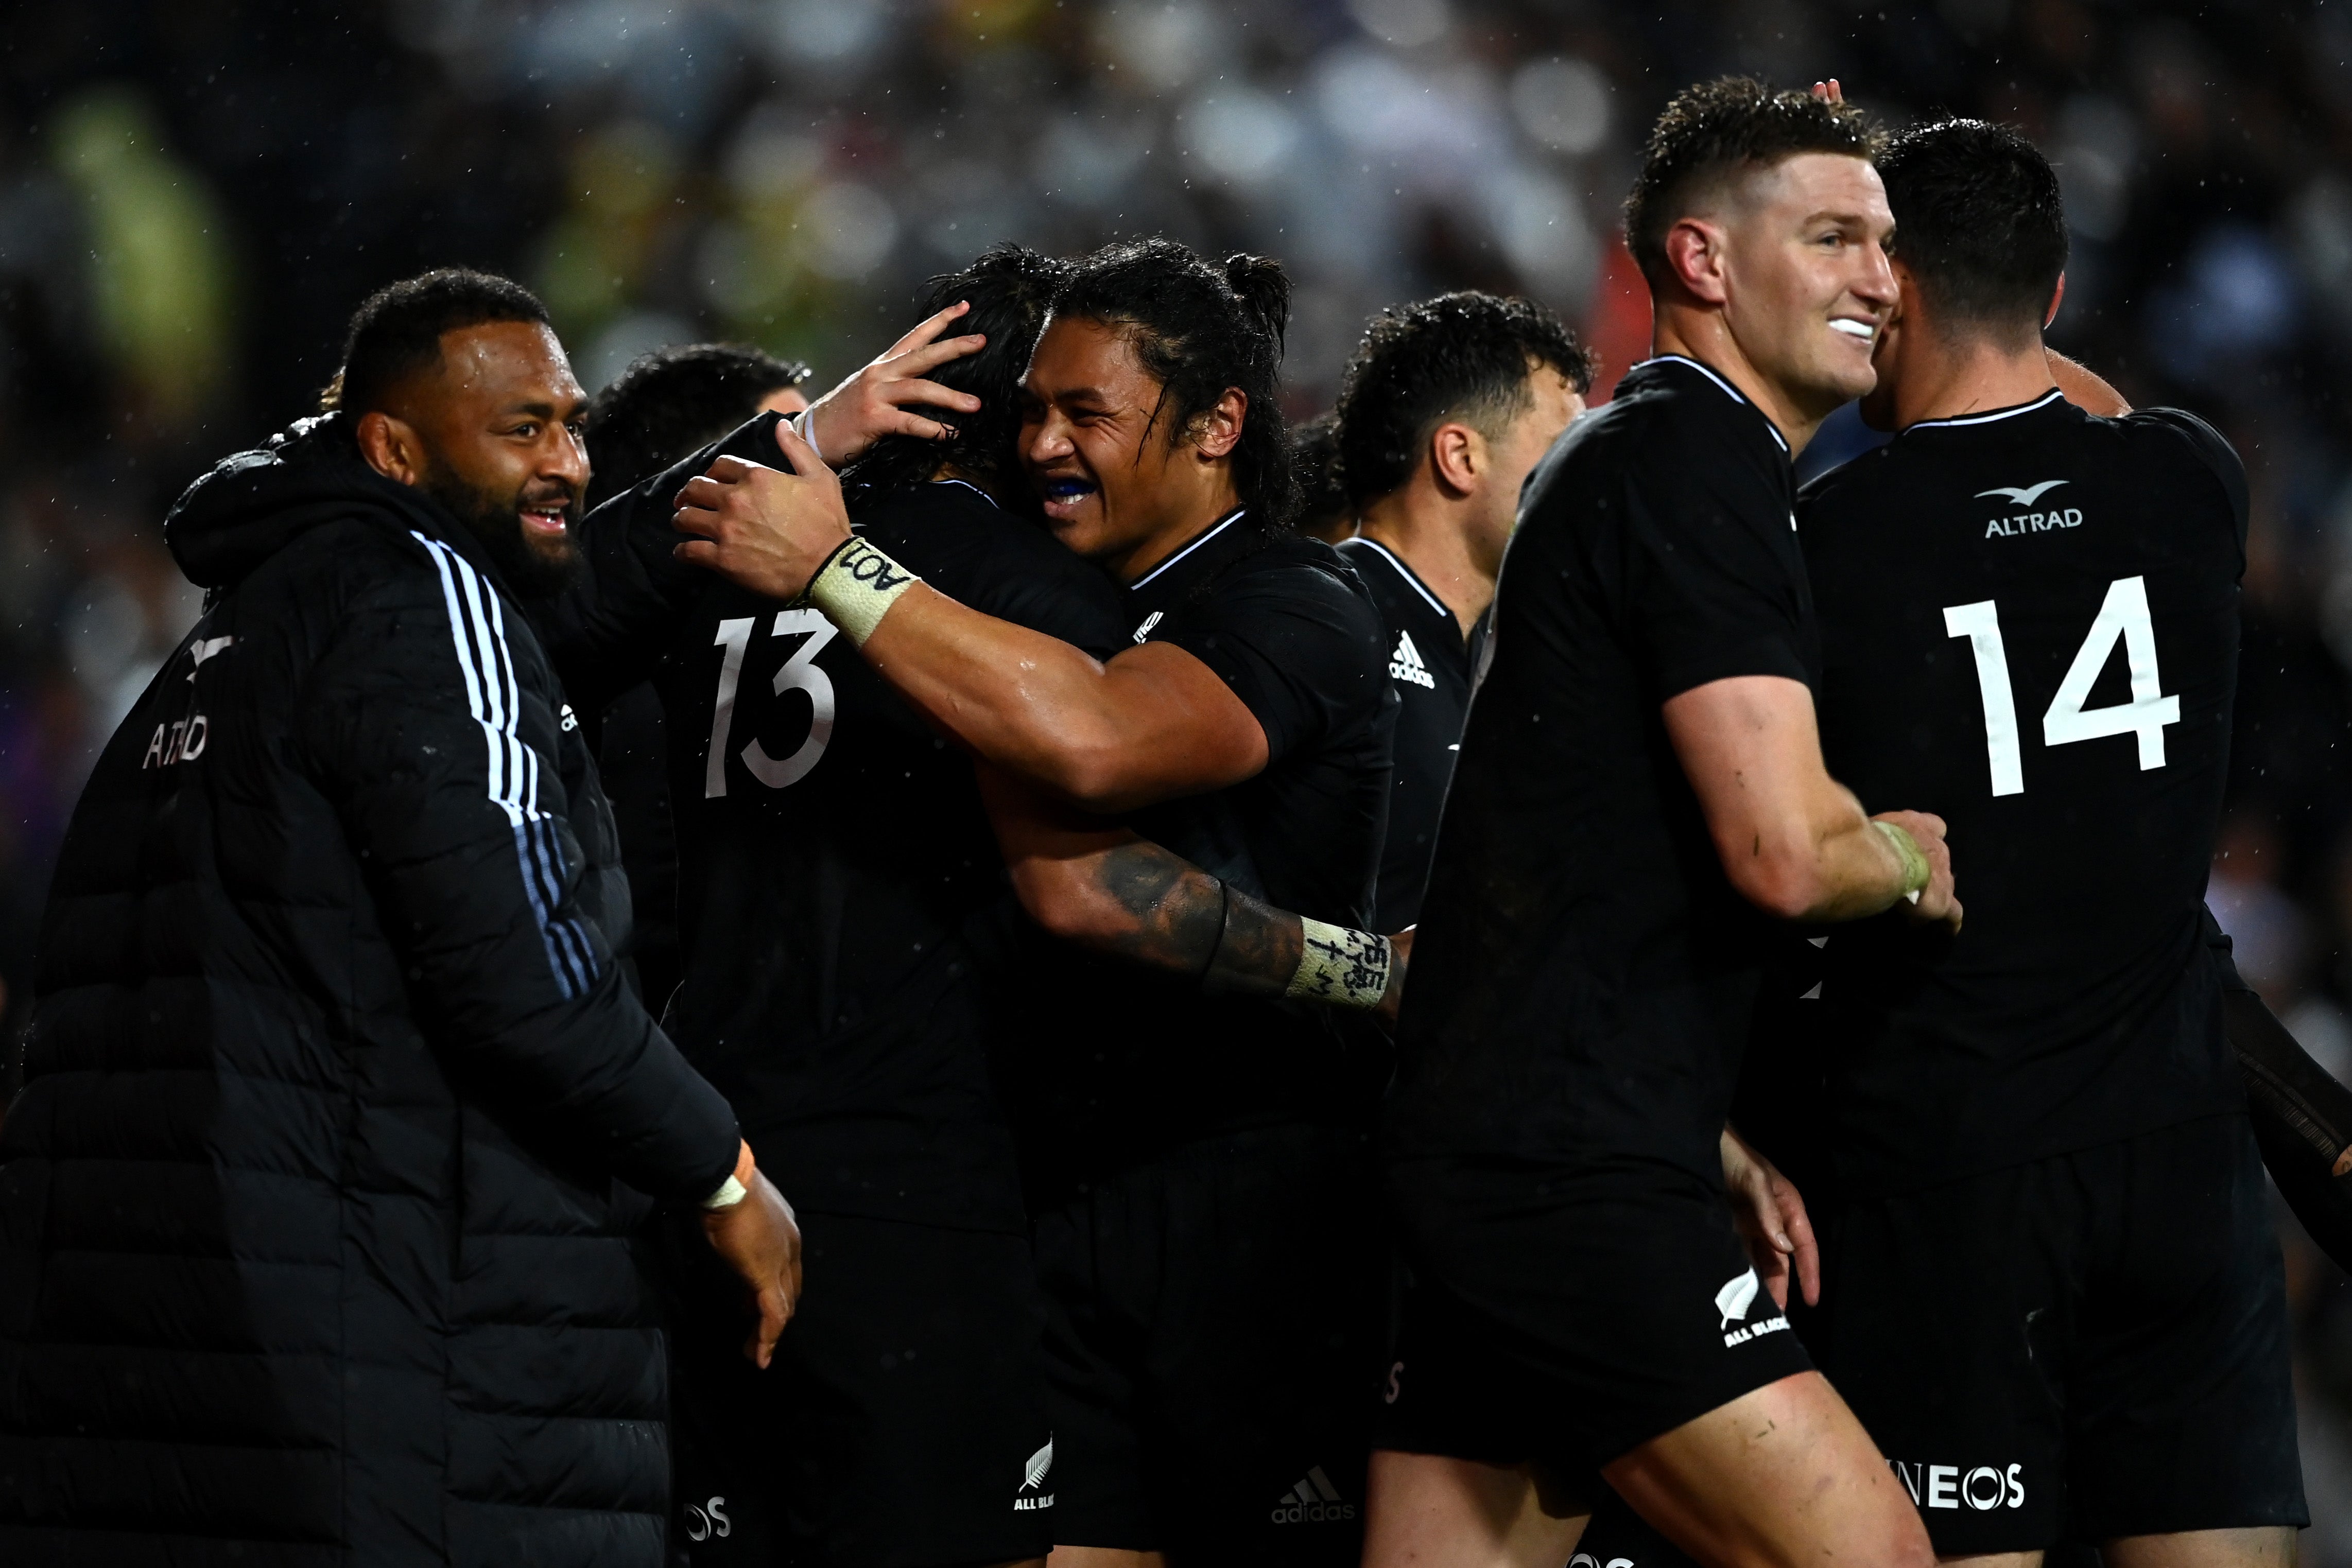 Rieko Ioane of the All Blacks celebrates after scoring a try